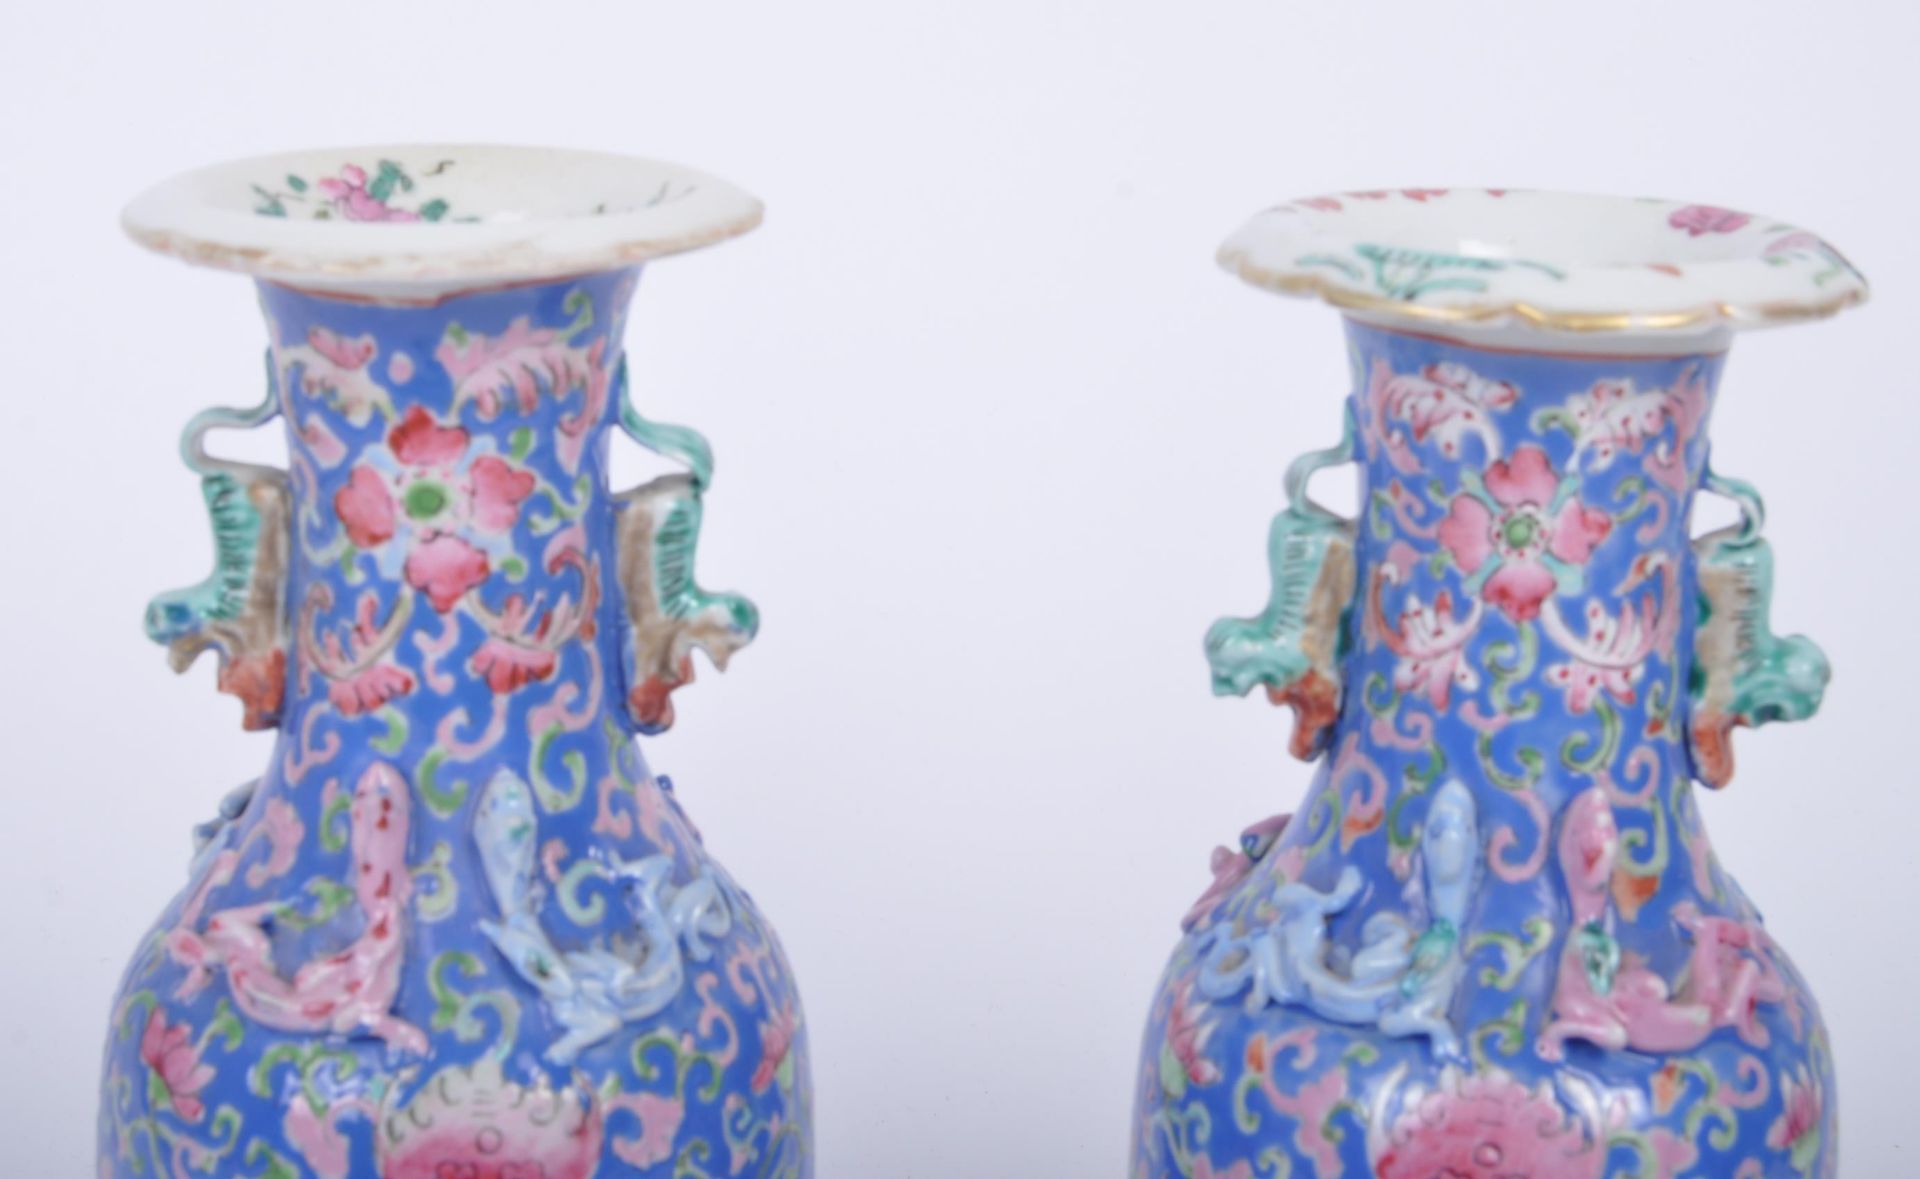 PAIR OF LATE 19TH CENTURY CHINESE CERAMIC FAMILLE ROSE VASES - Image 2 of 6